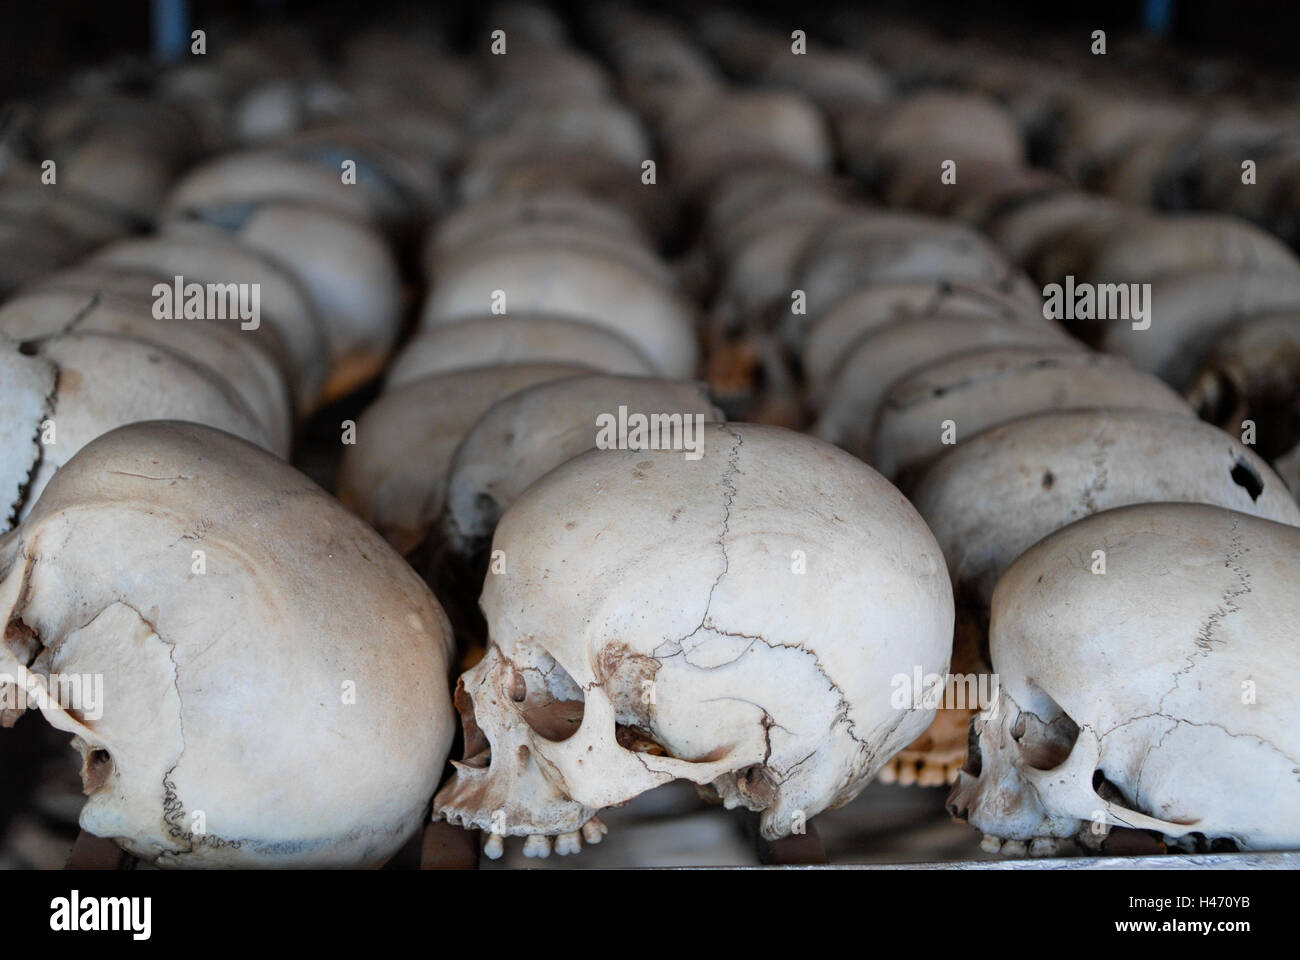 RWANDA Genocide memorial Ntarama , during the genocide in April 1994 about 5000 Tutsi people were killed by Hutu murder in this church, skulls and bones of murdered people in mass grave Stock Photo